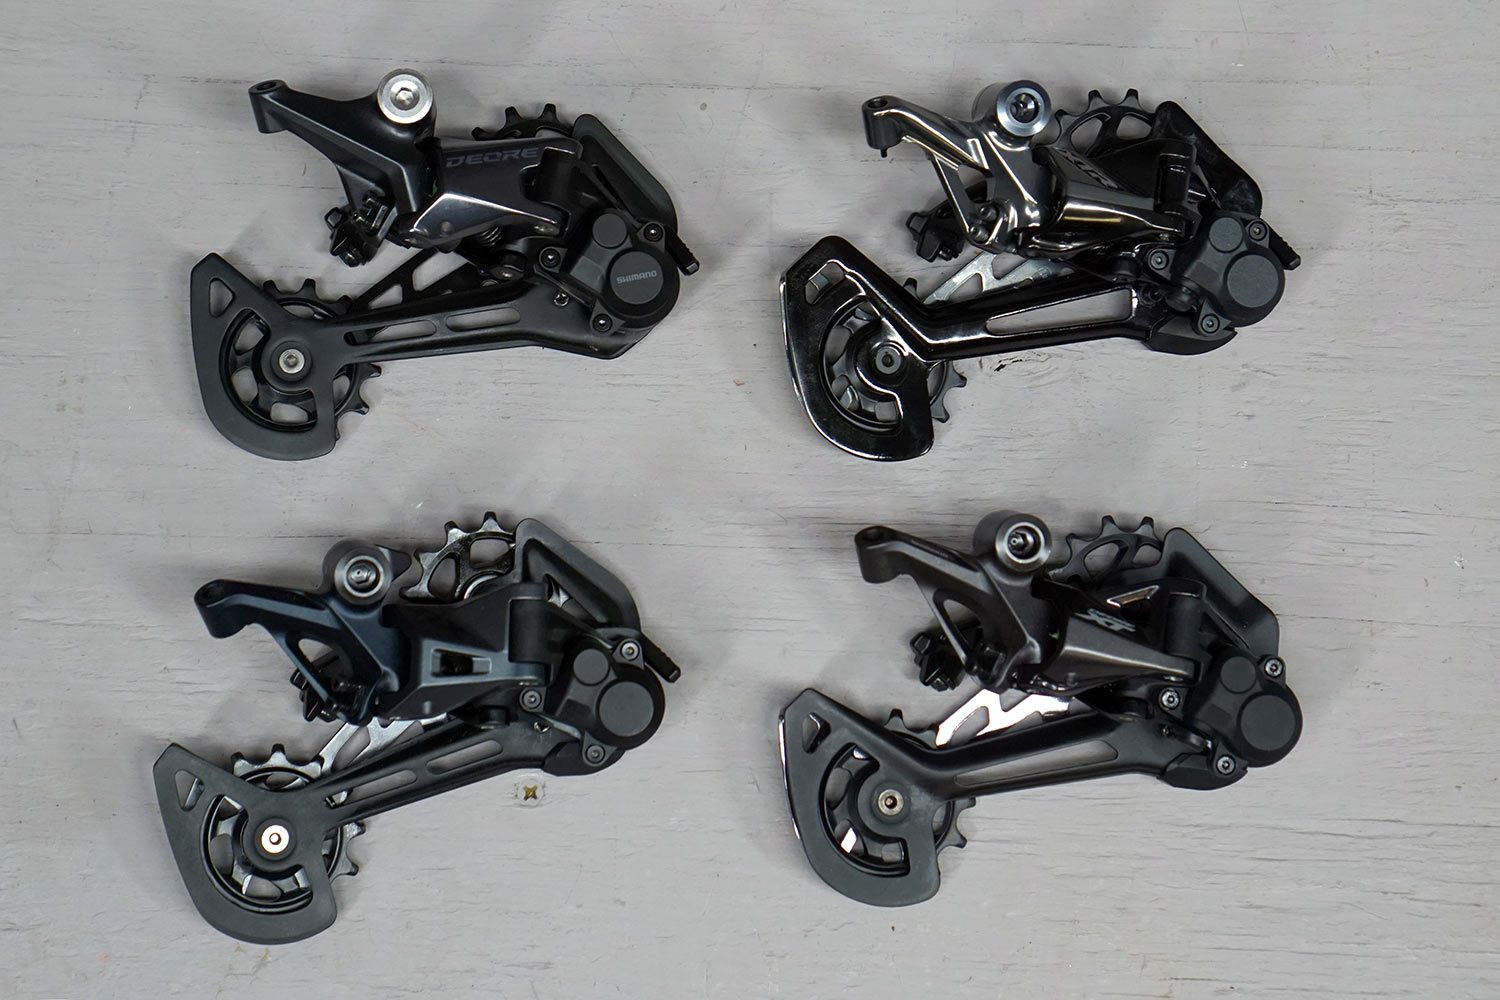 all four shimano 12 speed MTB rear derailleurs compared side by side